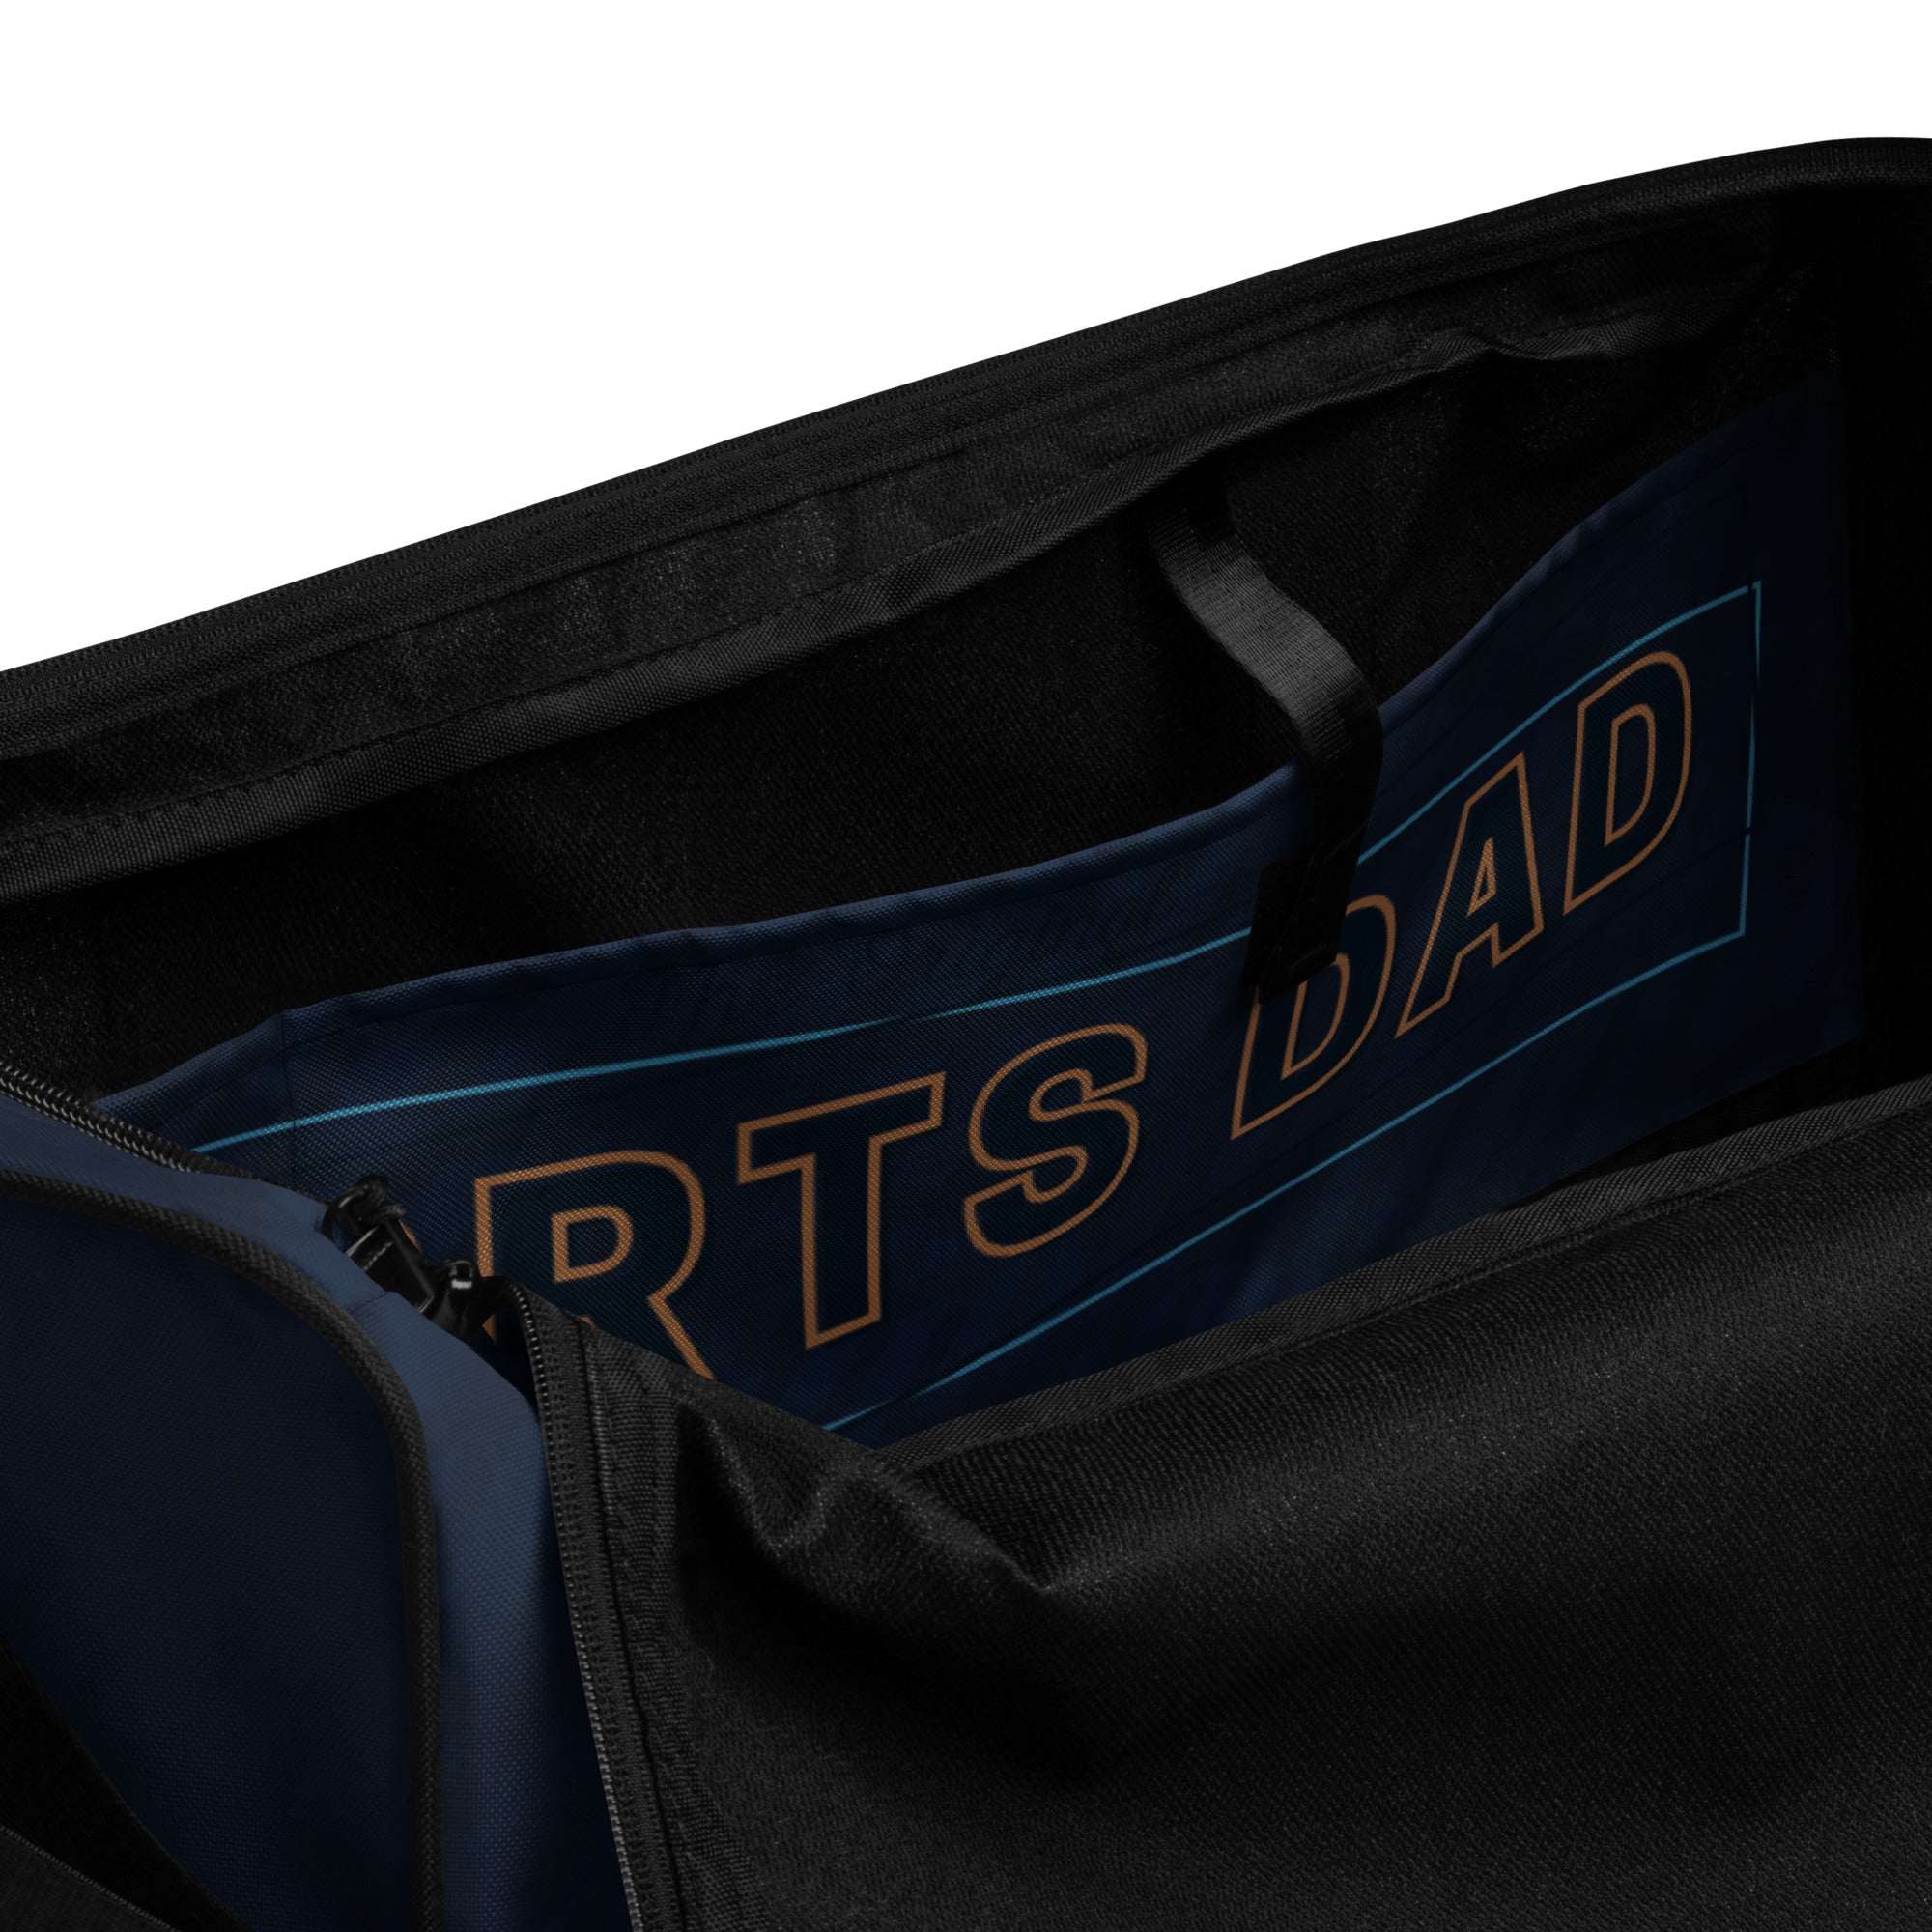 Sports Dad Ultimate Duffle Bag - Gravy Navy